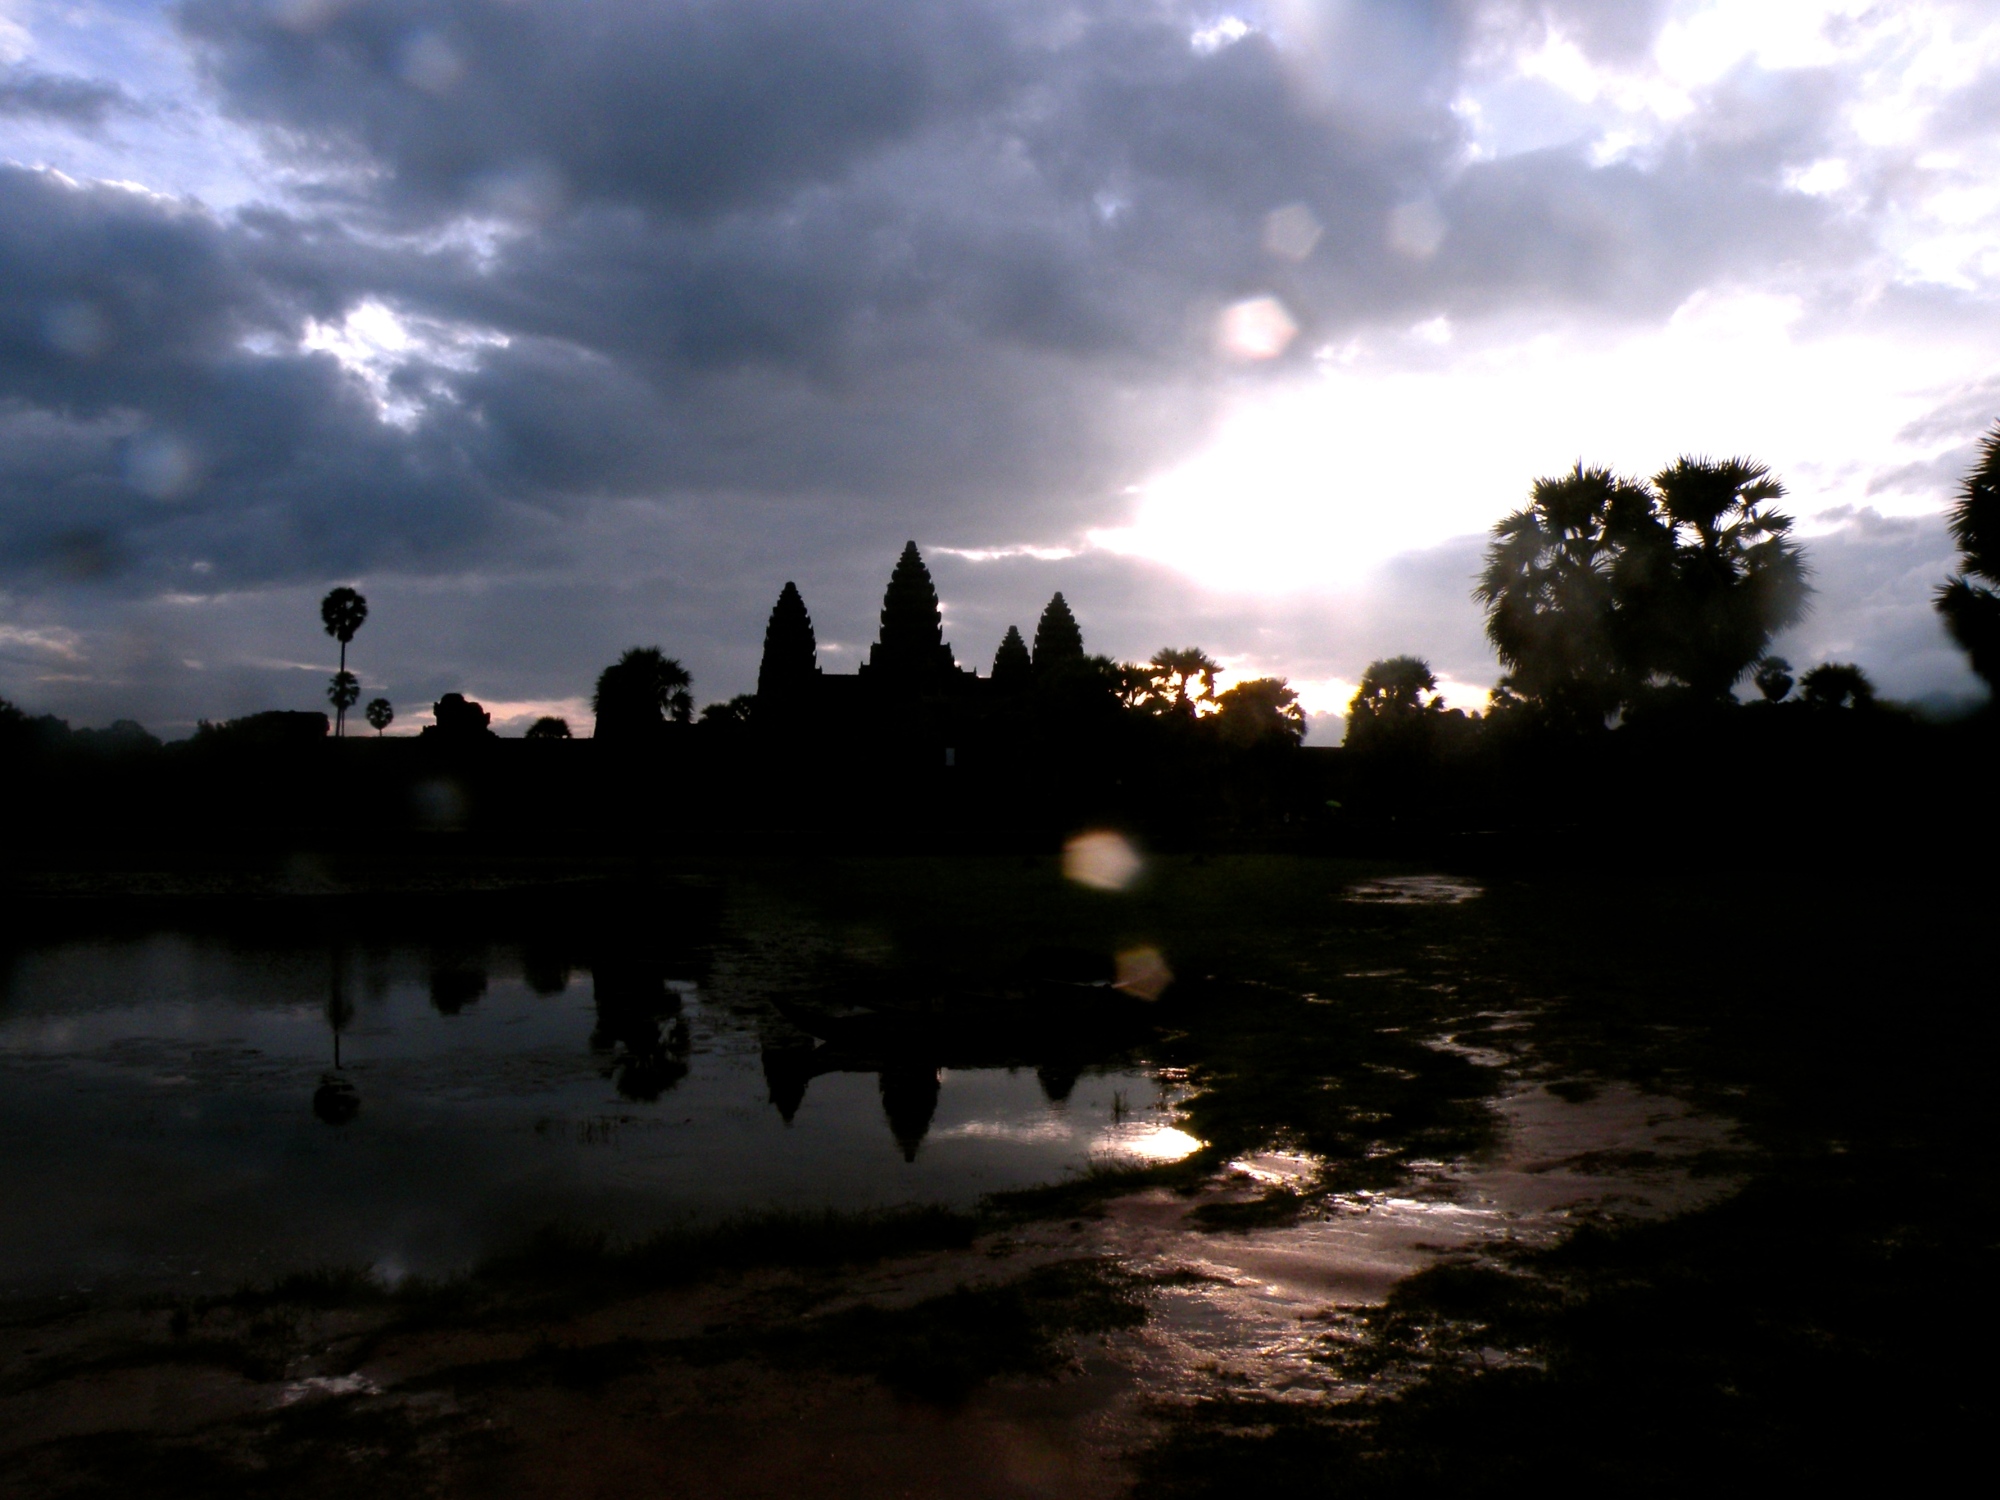 things to do in cambodia